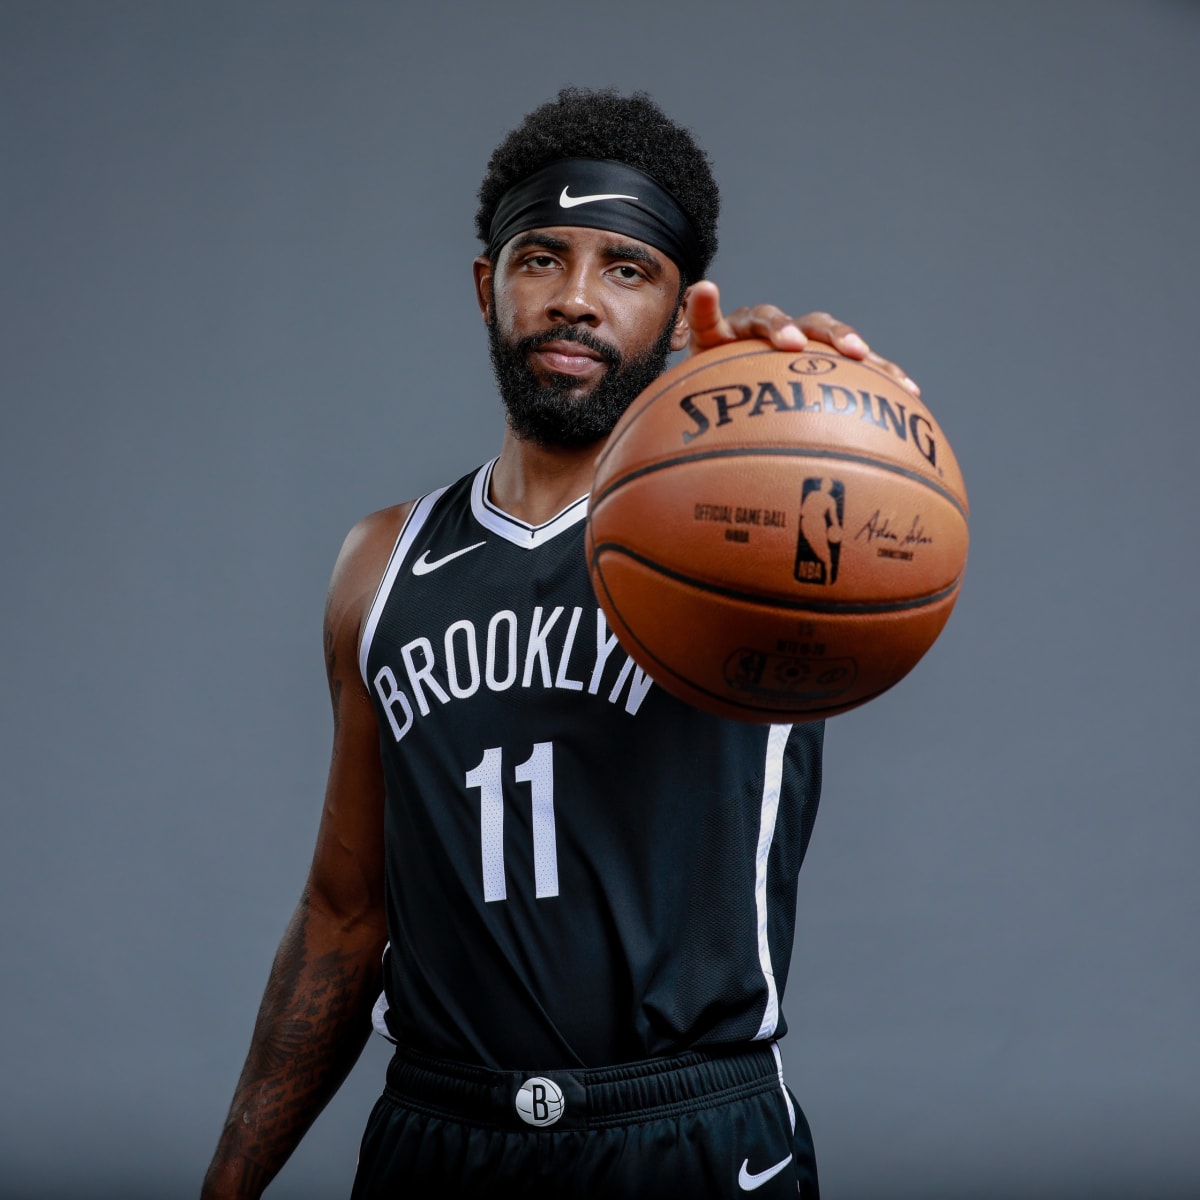 Kyrie Irving's first press conference in a Nets jersey: This